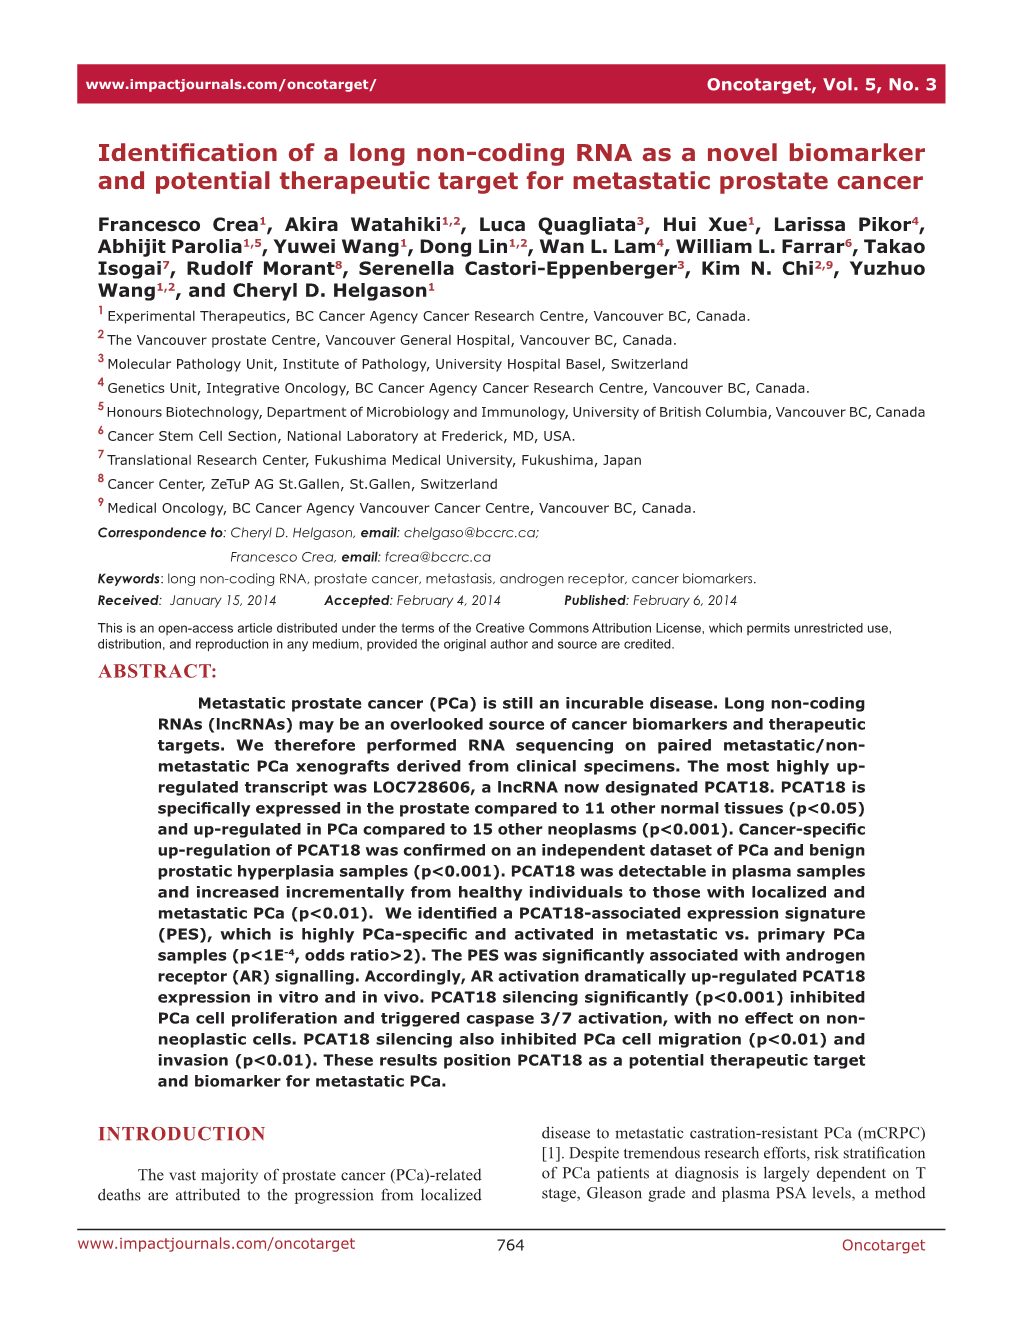 Identification of a Long Non-Coding RNA As a Novel Biomarker and Potential Therapeutic Target for Metastatic Prostate Cancer